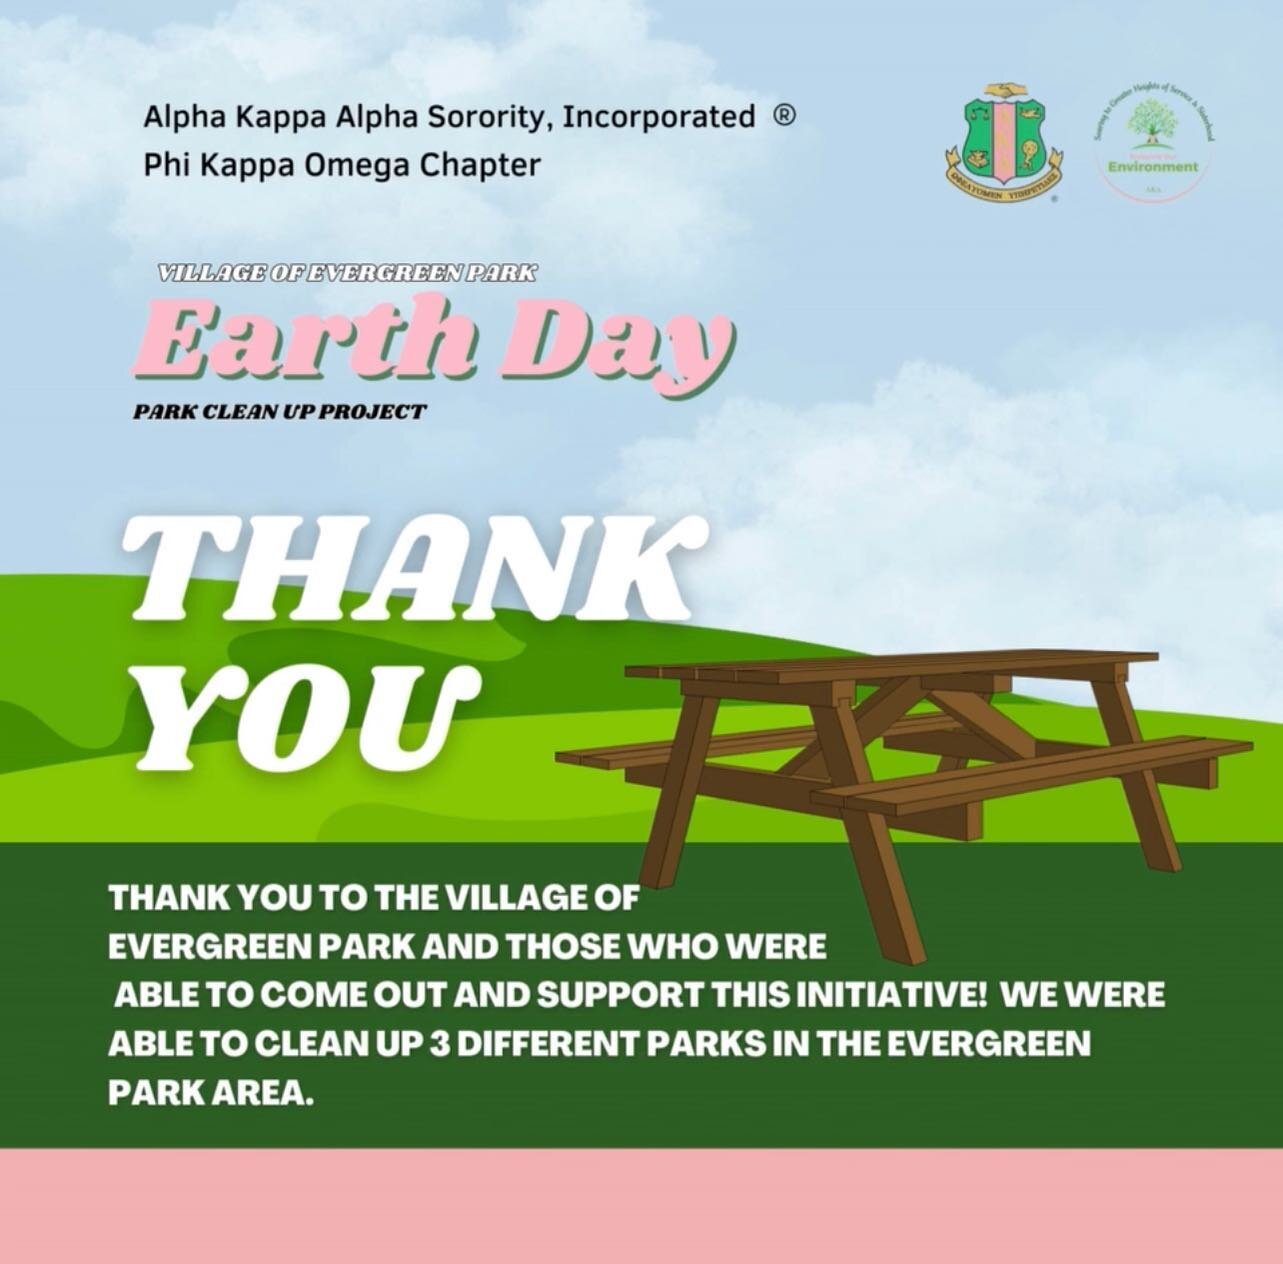 Thank you to the Village of Evergreen Park and those that came out and support this initiative on Earth Day! Thank you for helping us clean 3 parks in the Evergreen Park area 🌎🌱💚
 
Thank you again @villageofep 
 
#earthday2023 #akapko #akacentral 